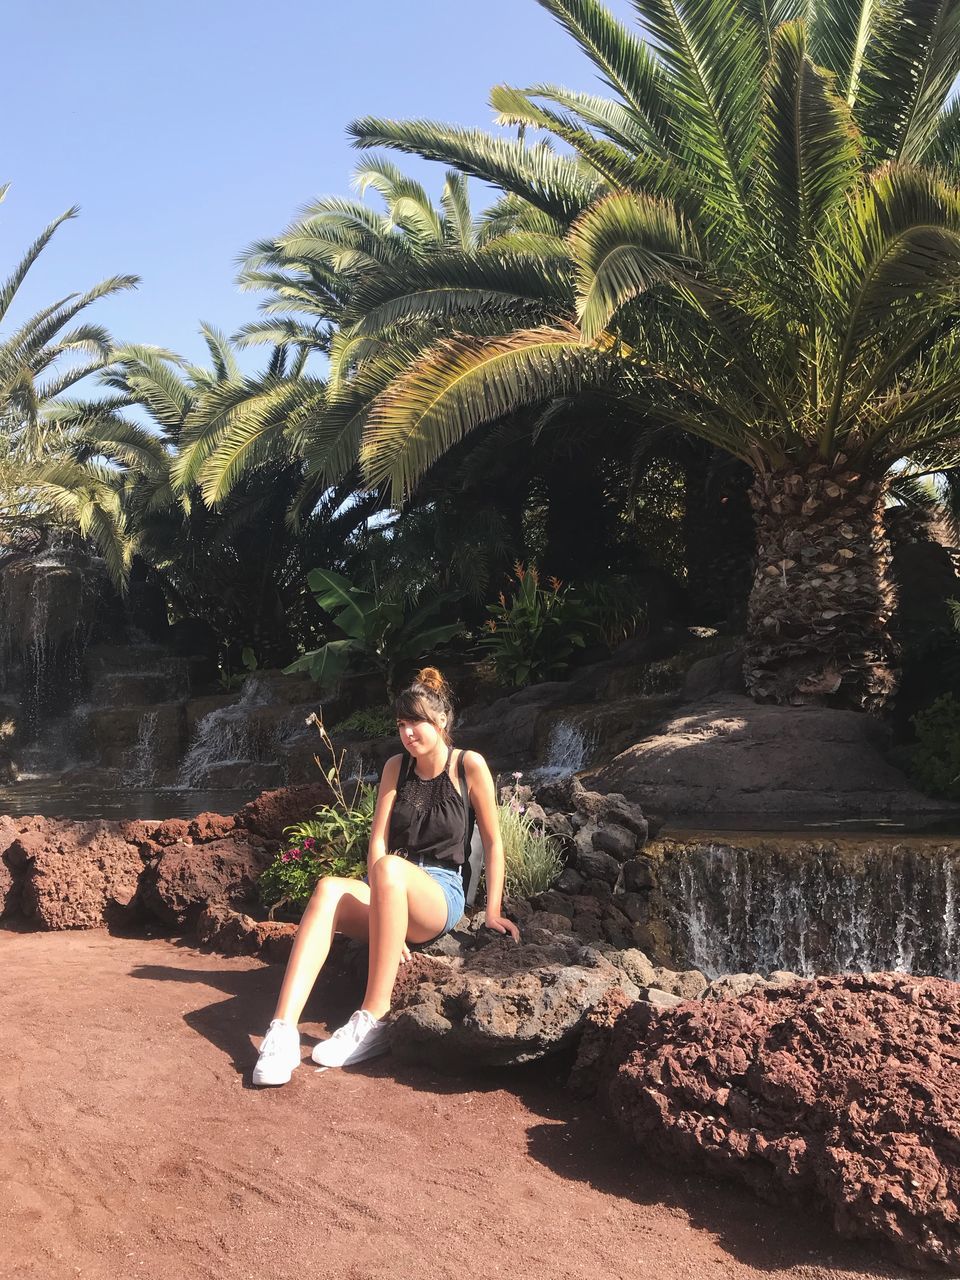 real people, rock - object, palm tree, young women, leisure activity, young adult, rock formation, full length, tree, one person, lifestyles, day, casual clothing, happiness, outdoors, beautiful woman, sitting, nature, water, beauty in nature, sky